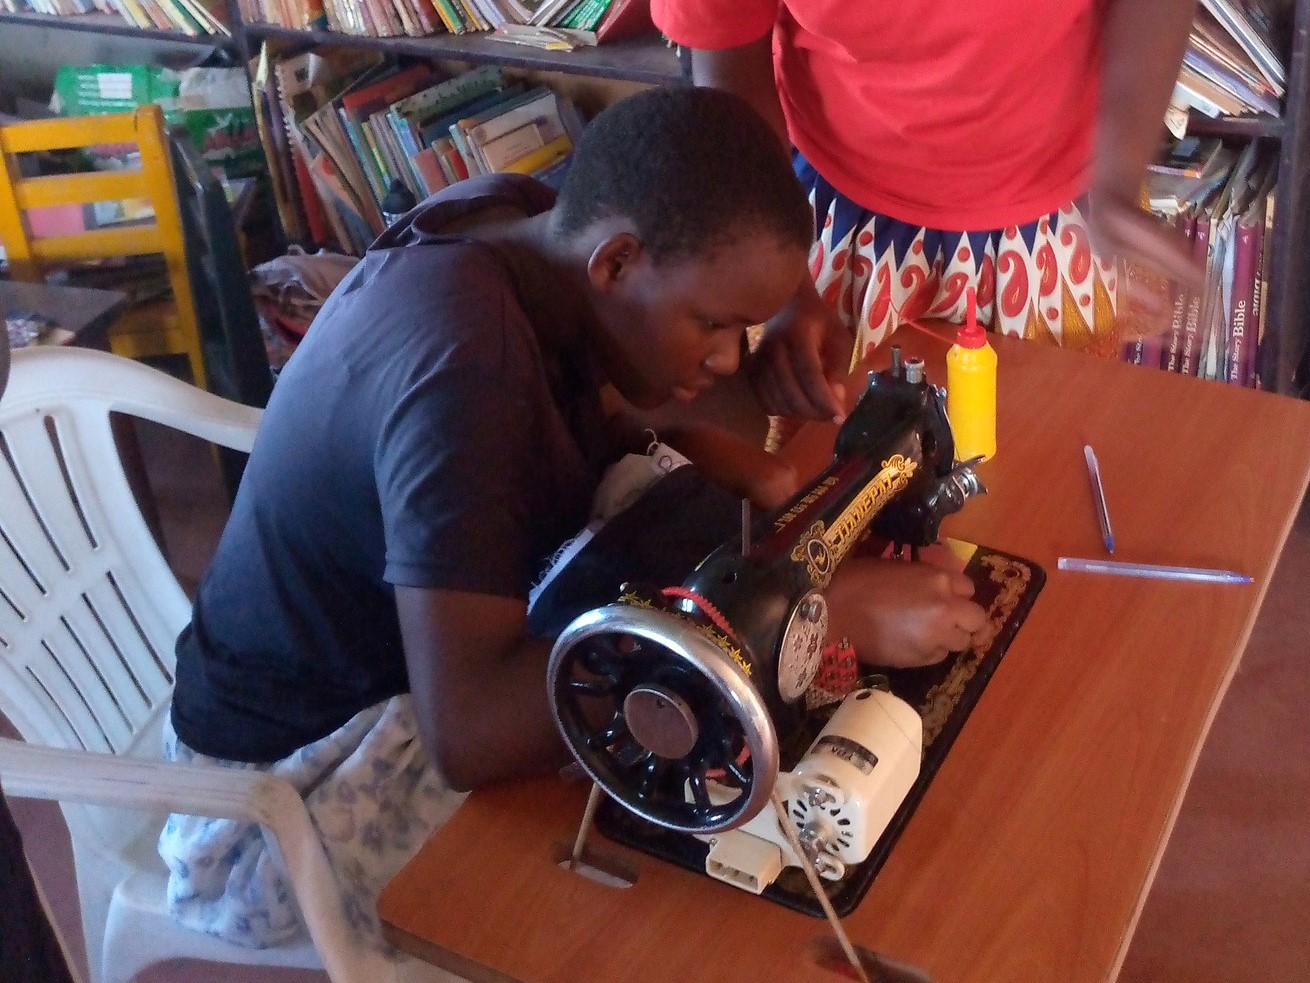 Young Uganda youth works on a sewing project.